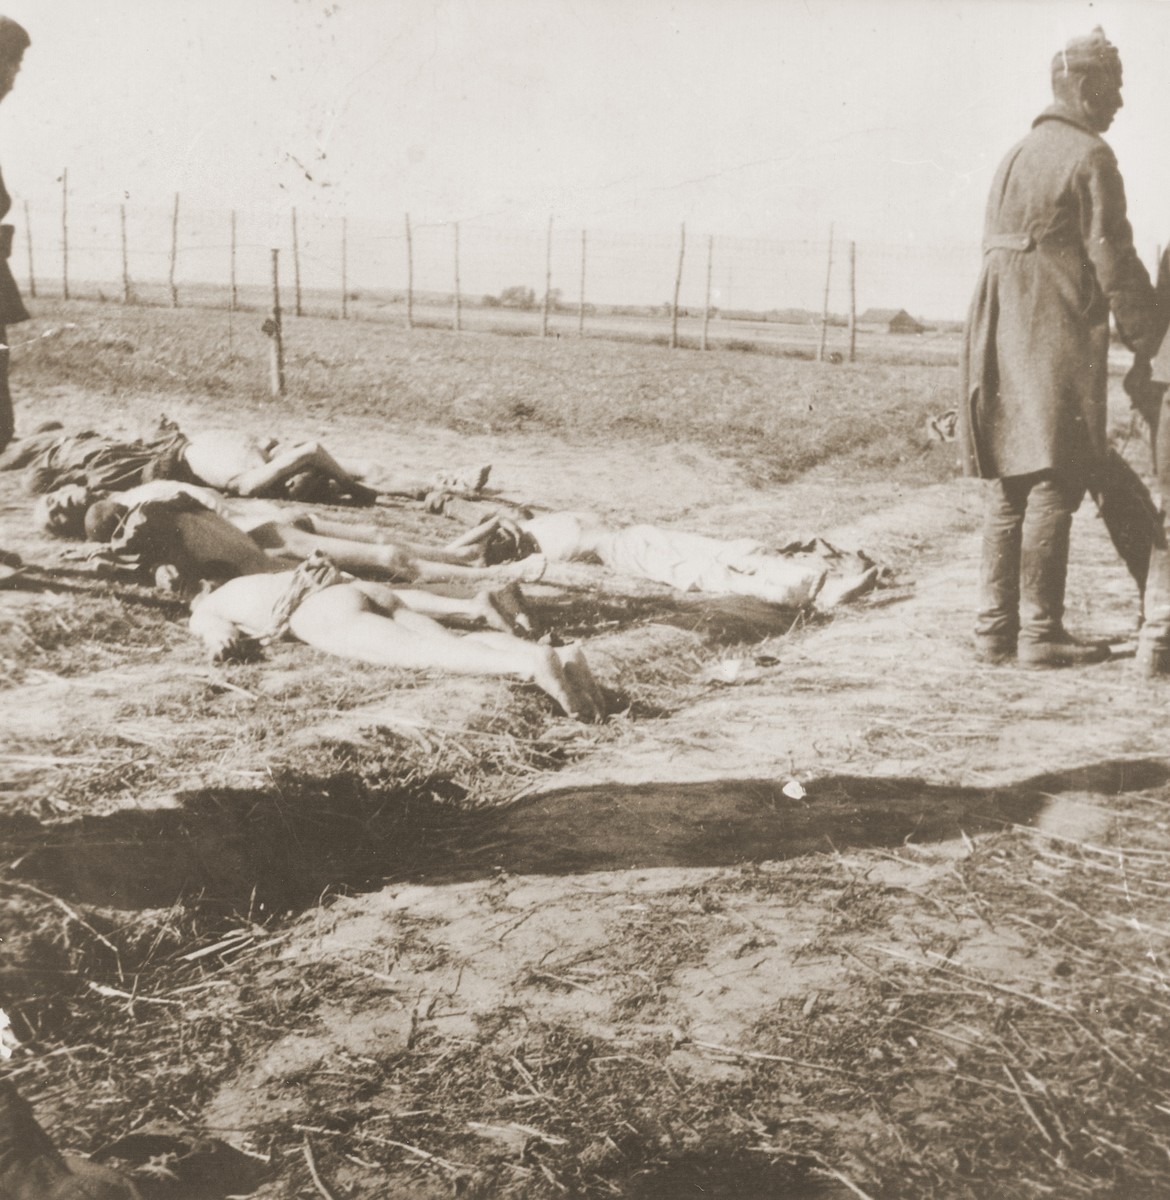 Soviet POWs moving the corpses of dead comrades to a place for burial.